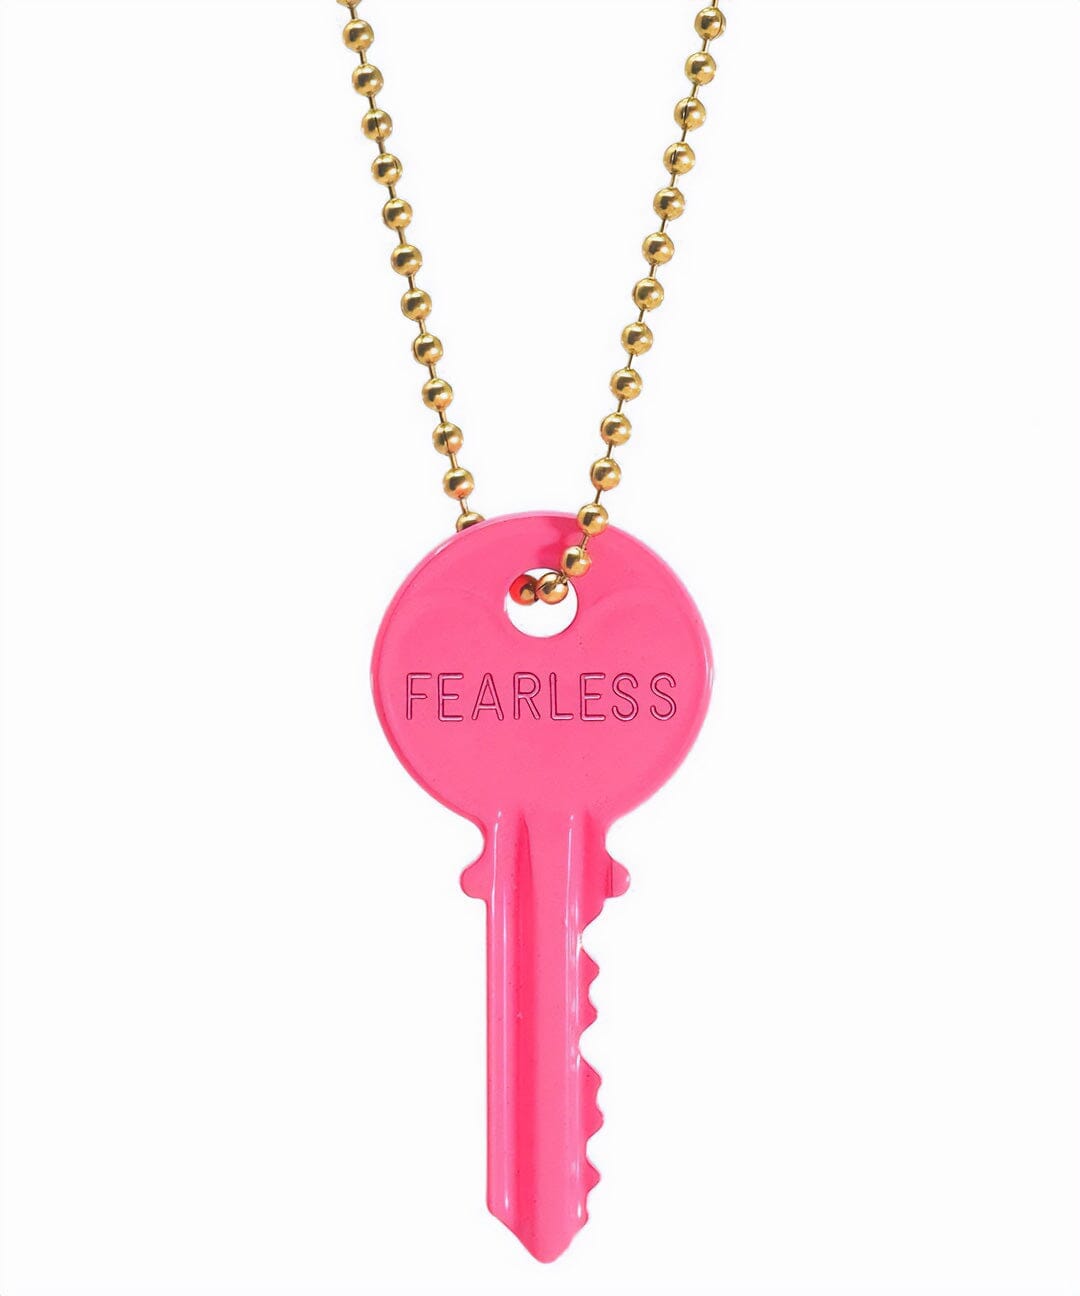 N - Hot Pink Classic Ball Chain Key Necklace Necklaces The Giving Keys 